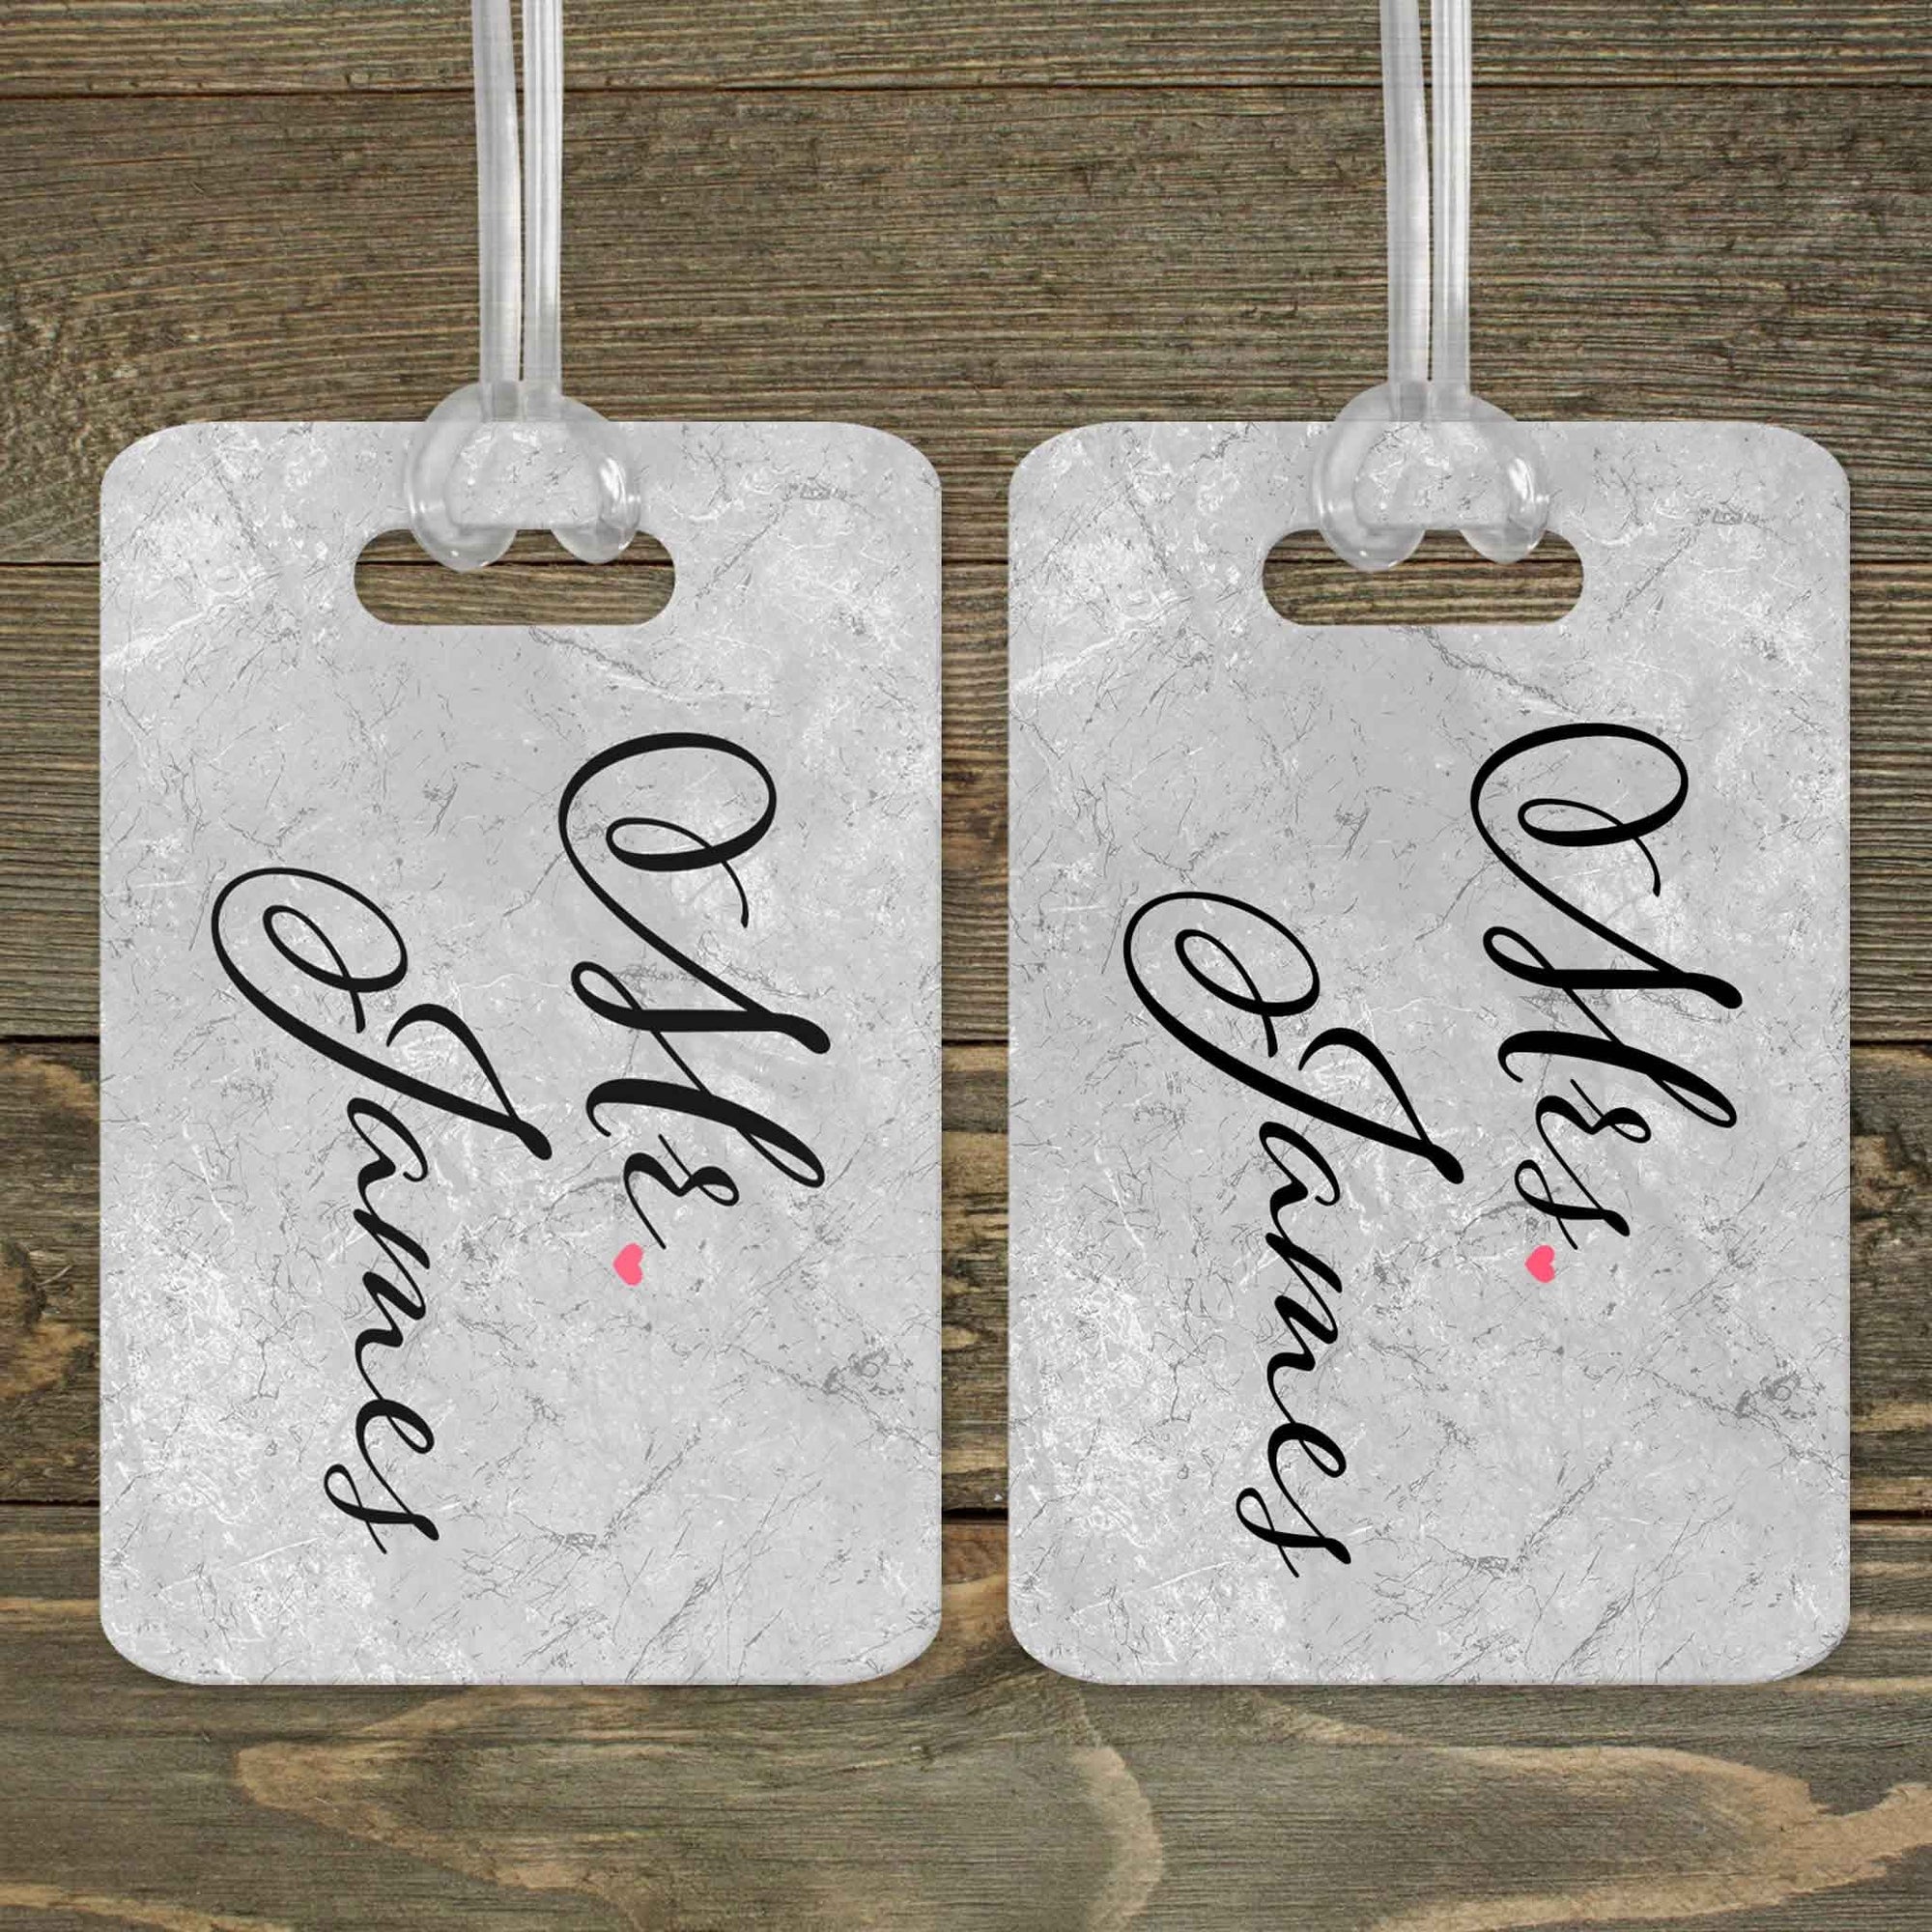 This & That Solutions - Personalized Luggage Tag | Custom Monogram Bag Tag | Mr. & Mrs. - Personalized Gifts & Custom Home Decor